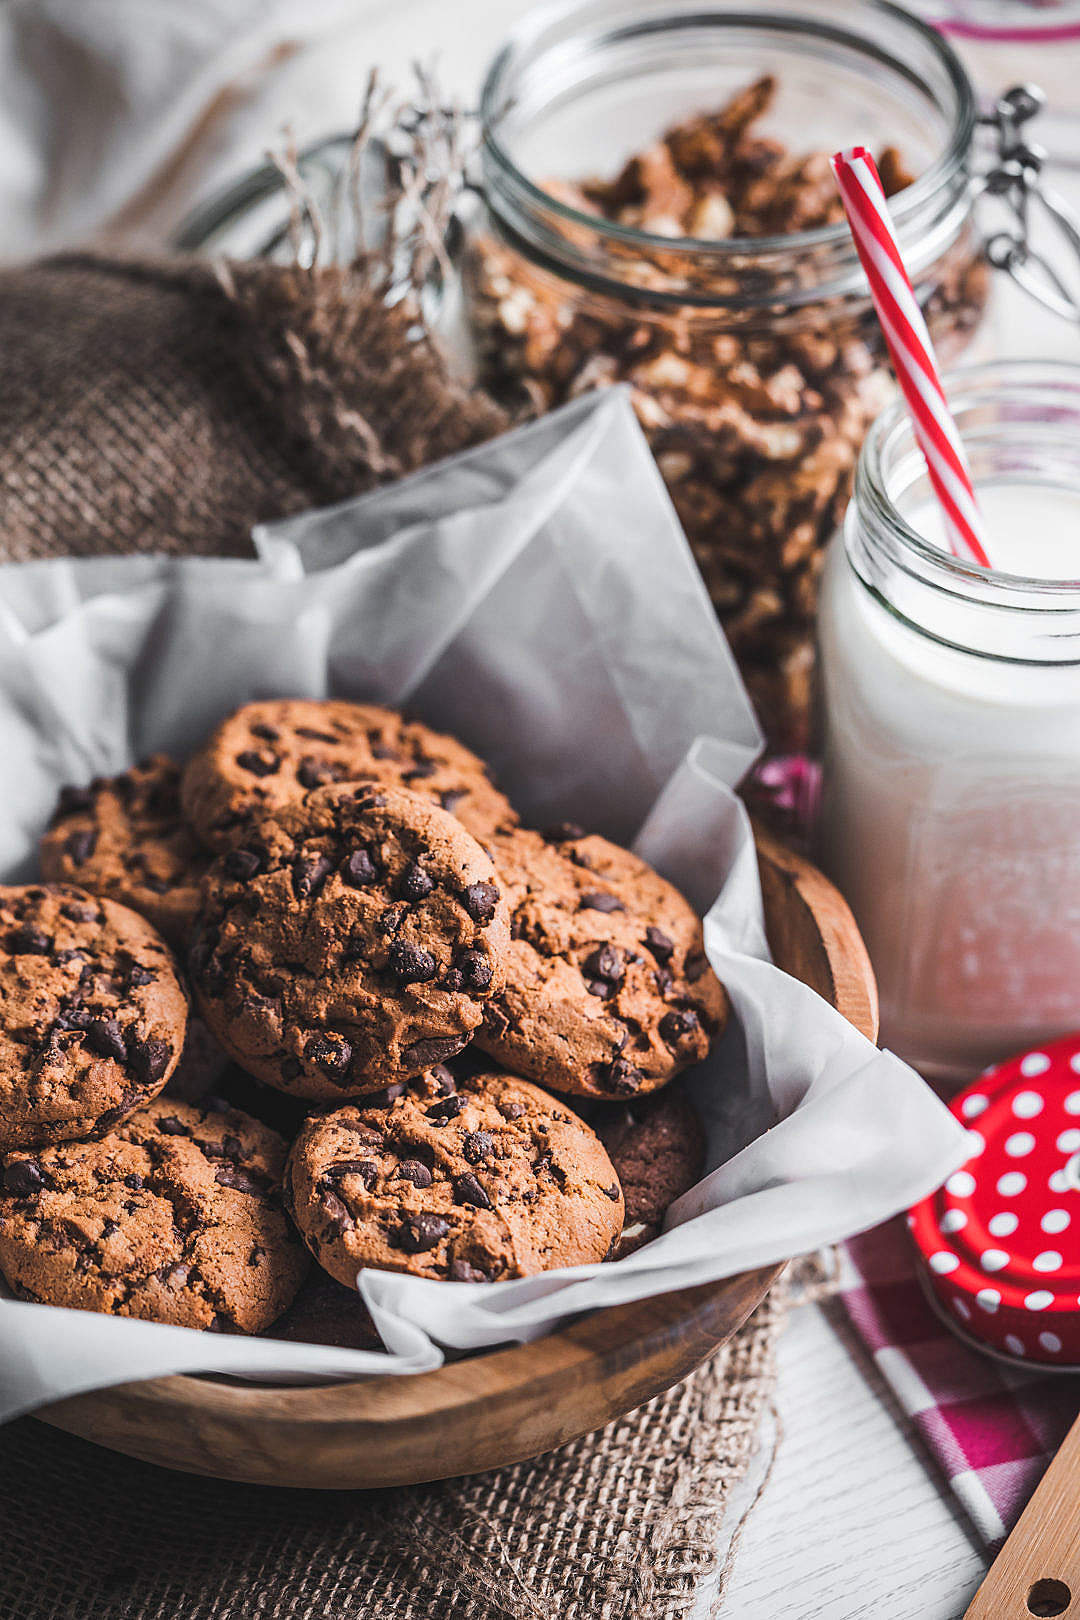 Download Chocolate Cookies with Milk Vertical FREE Stock Photo